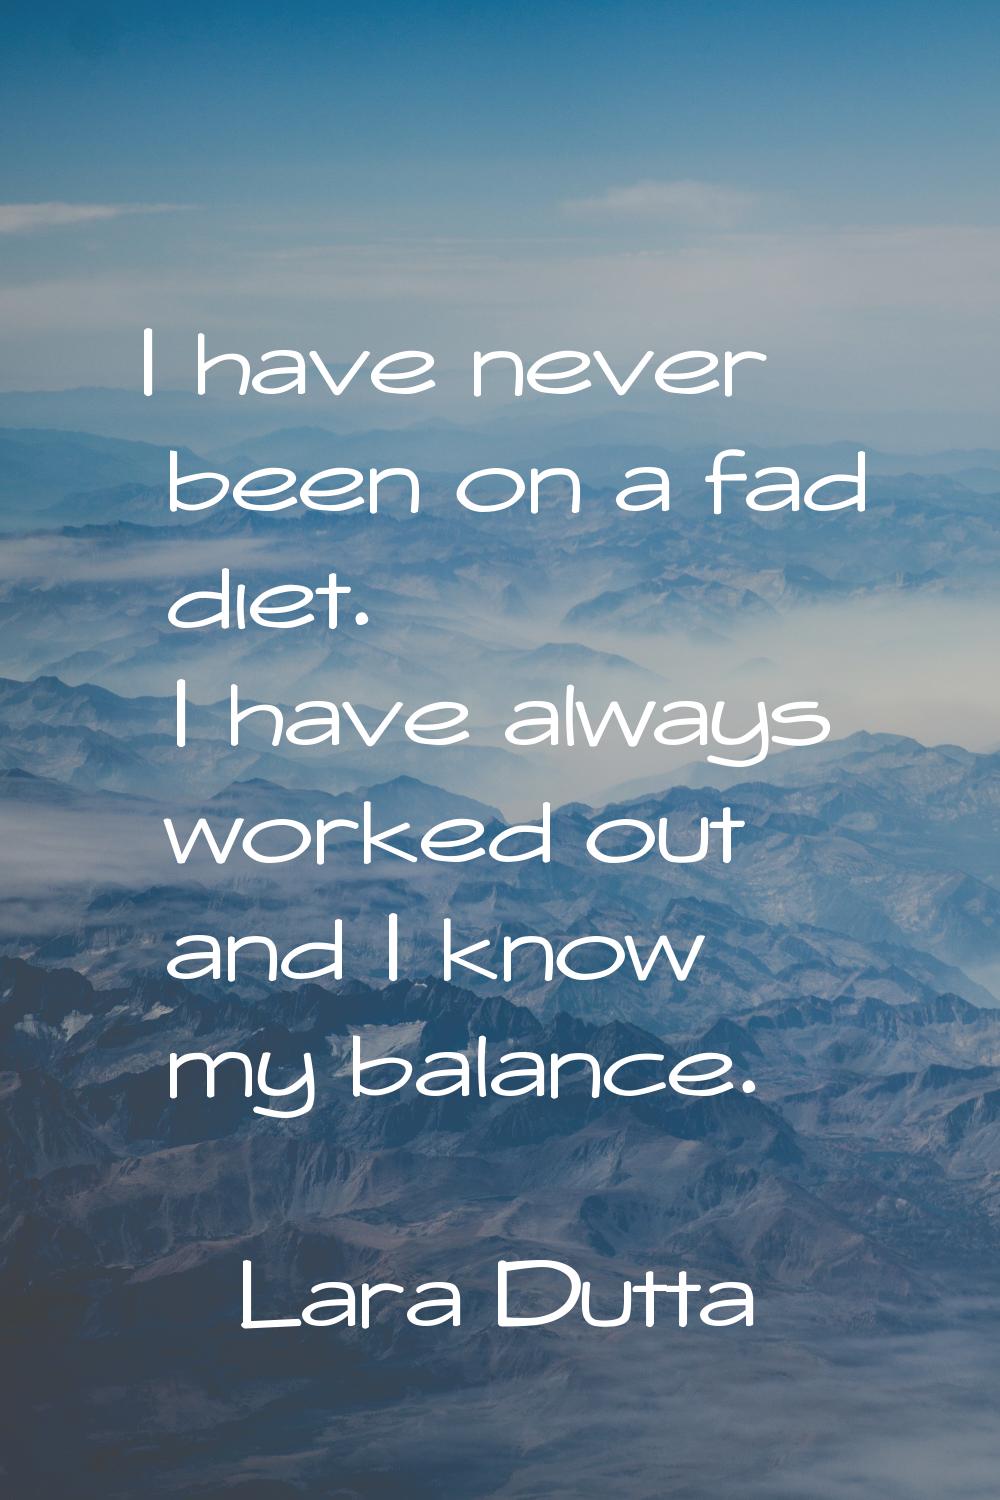 I have never been on a fad diet. I have always worked out and I know my balance.